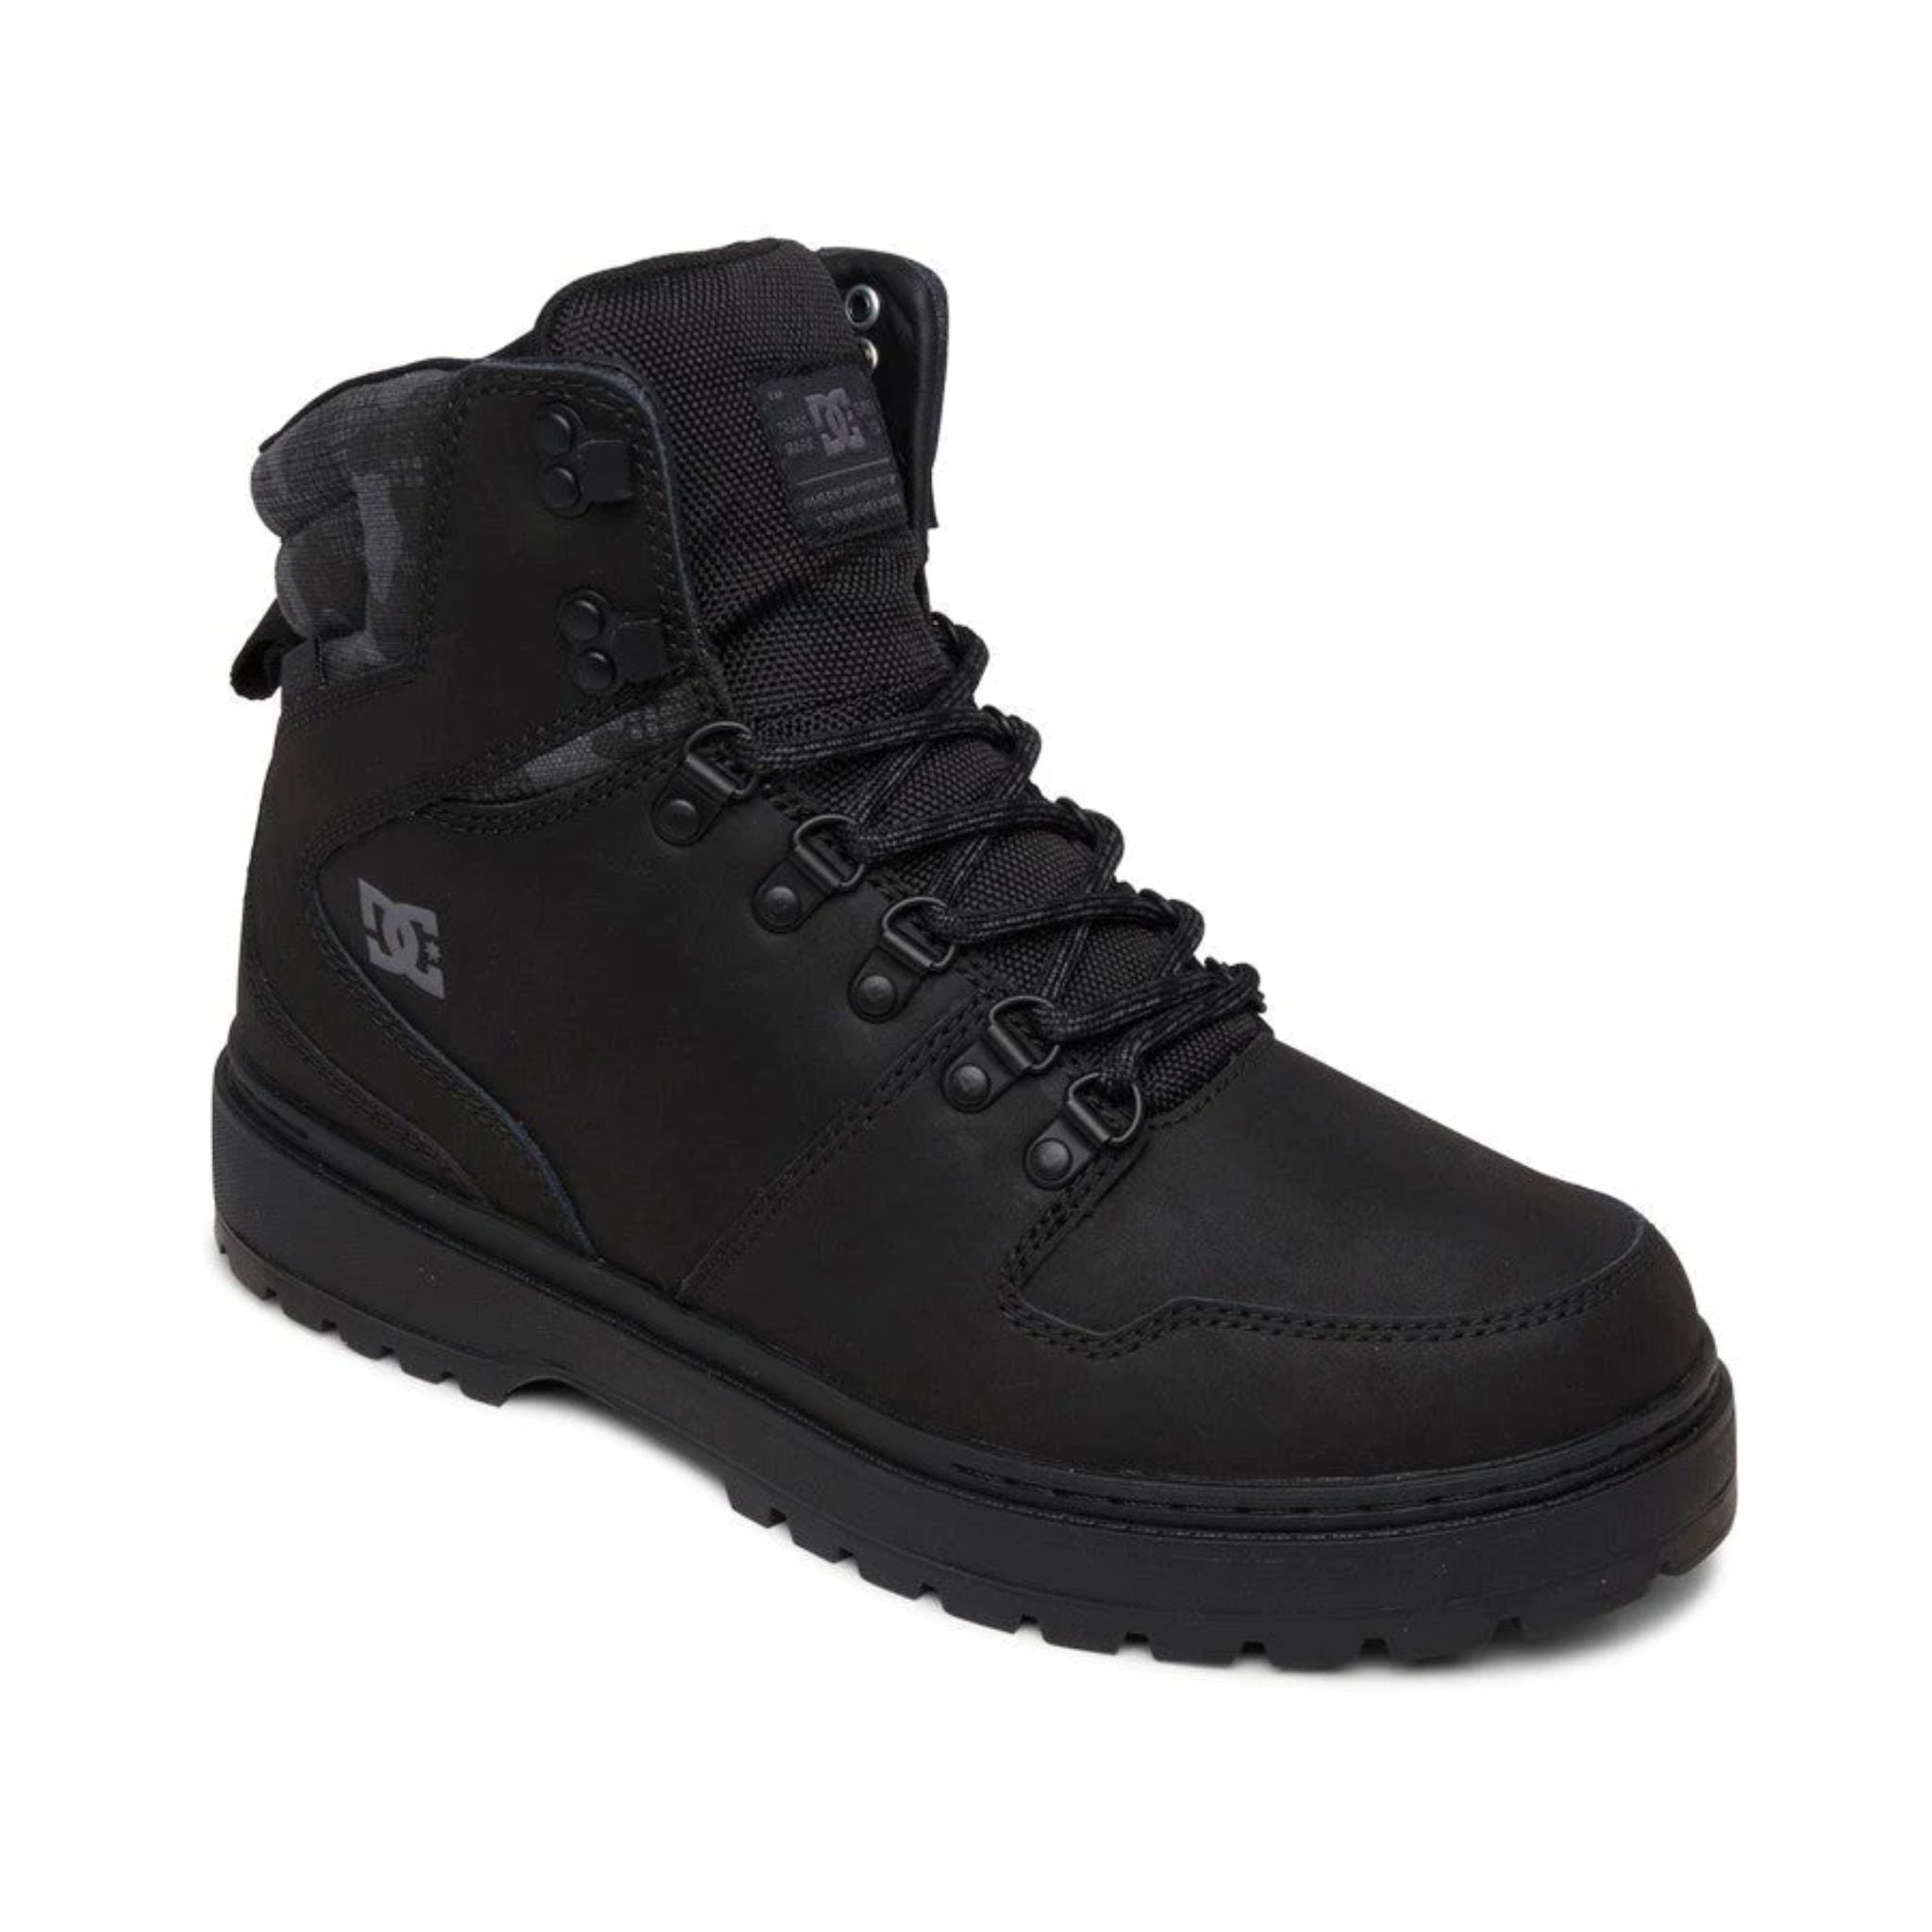 DC Mens Peary TR Winter Boot